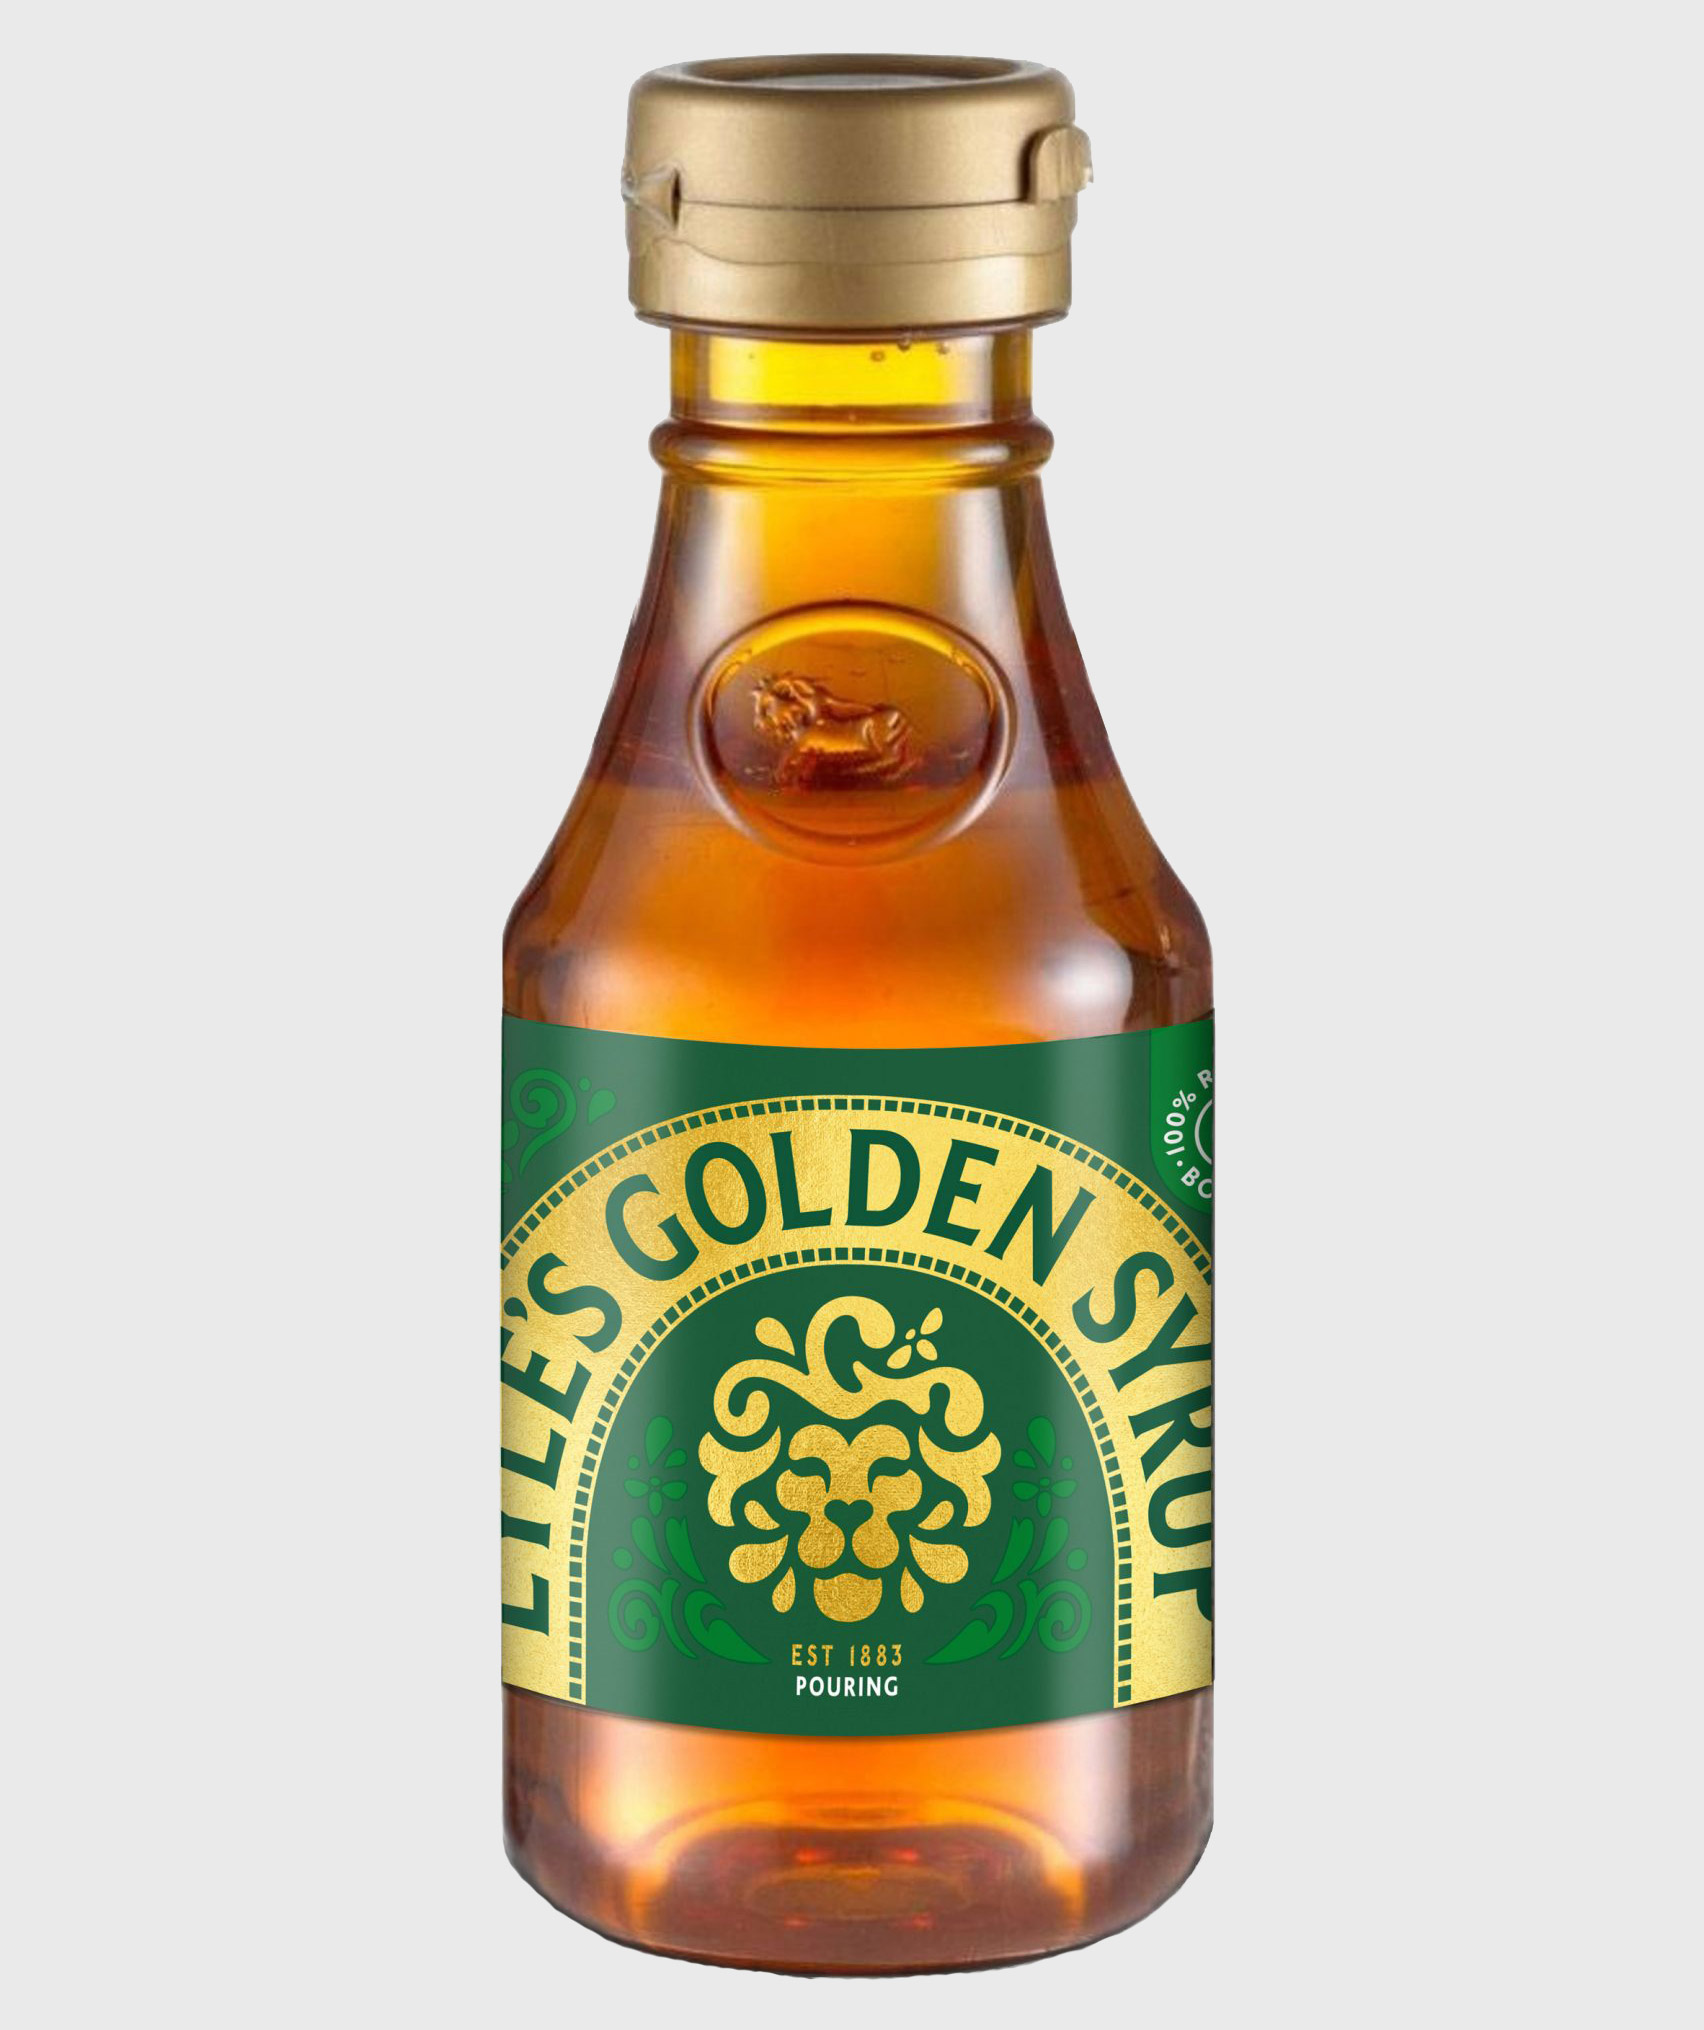 Tate and Lyle's Golden Syrup rebrand